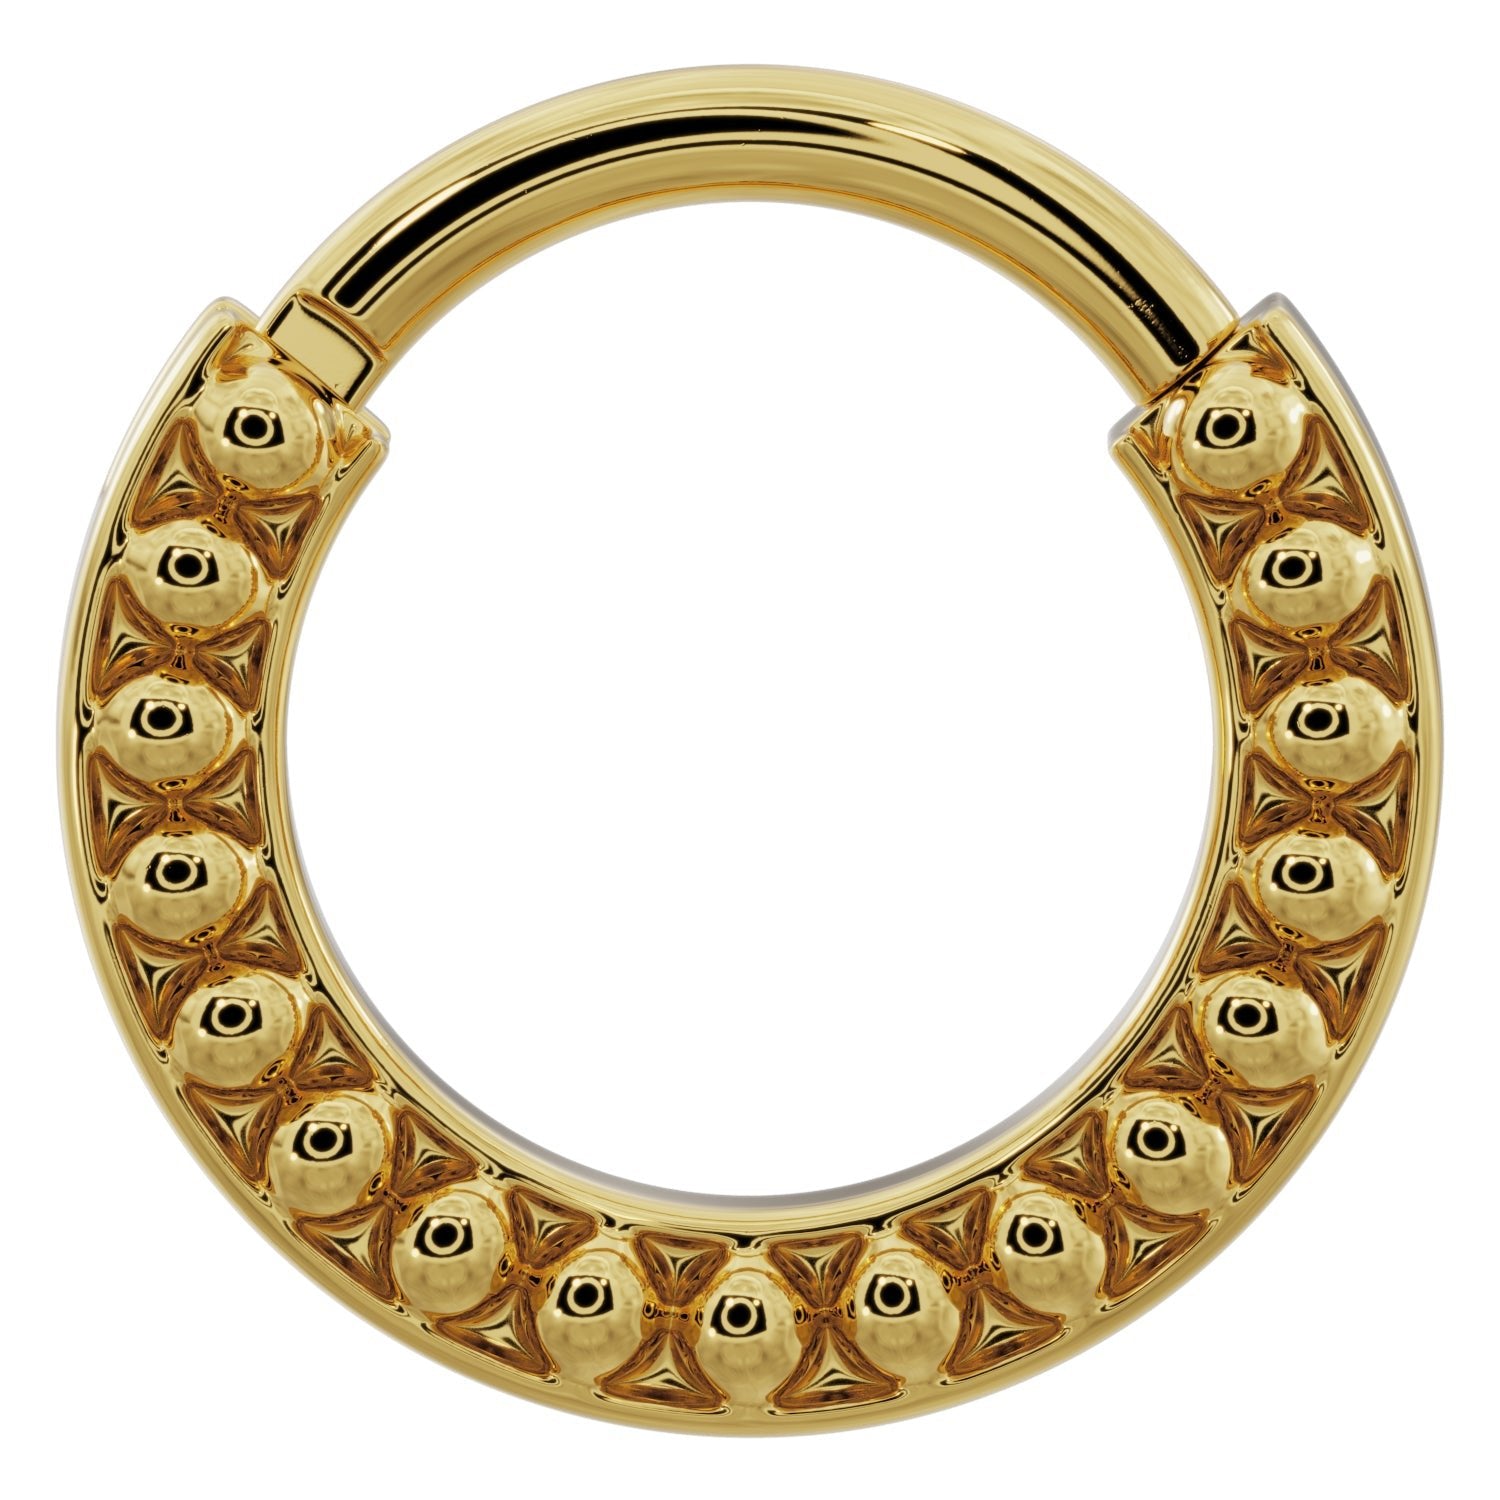 Channel Set Dome Beads 14k Gold Clicker Ring Hoop-14K Yellow Gold   16G (1.2mm)   3 8